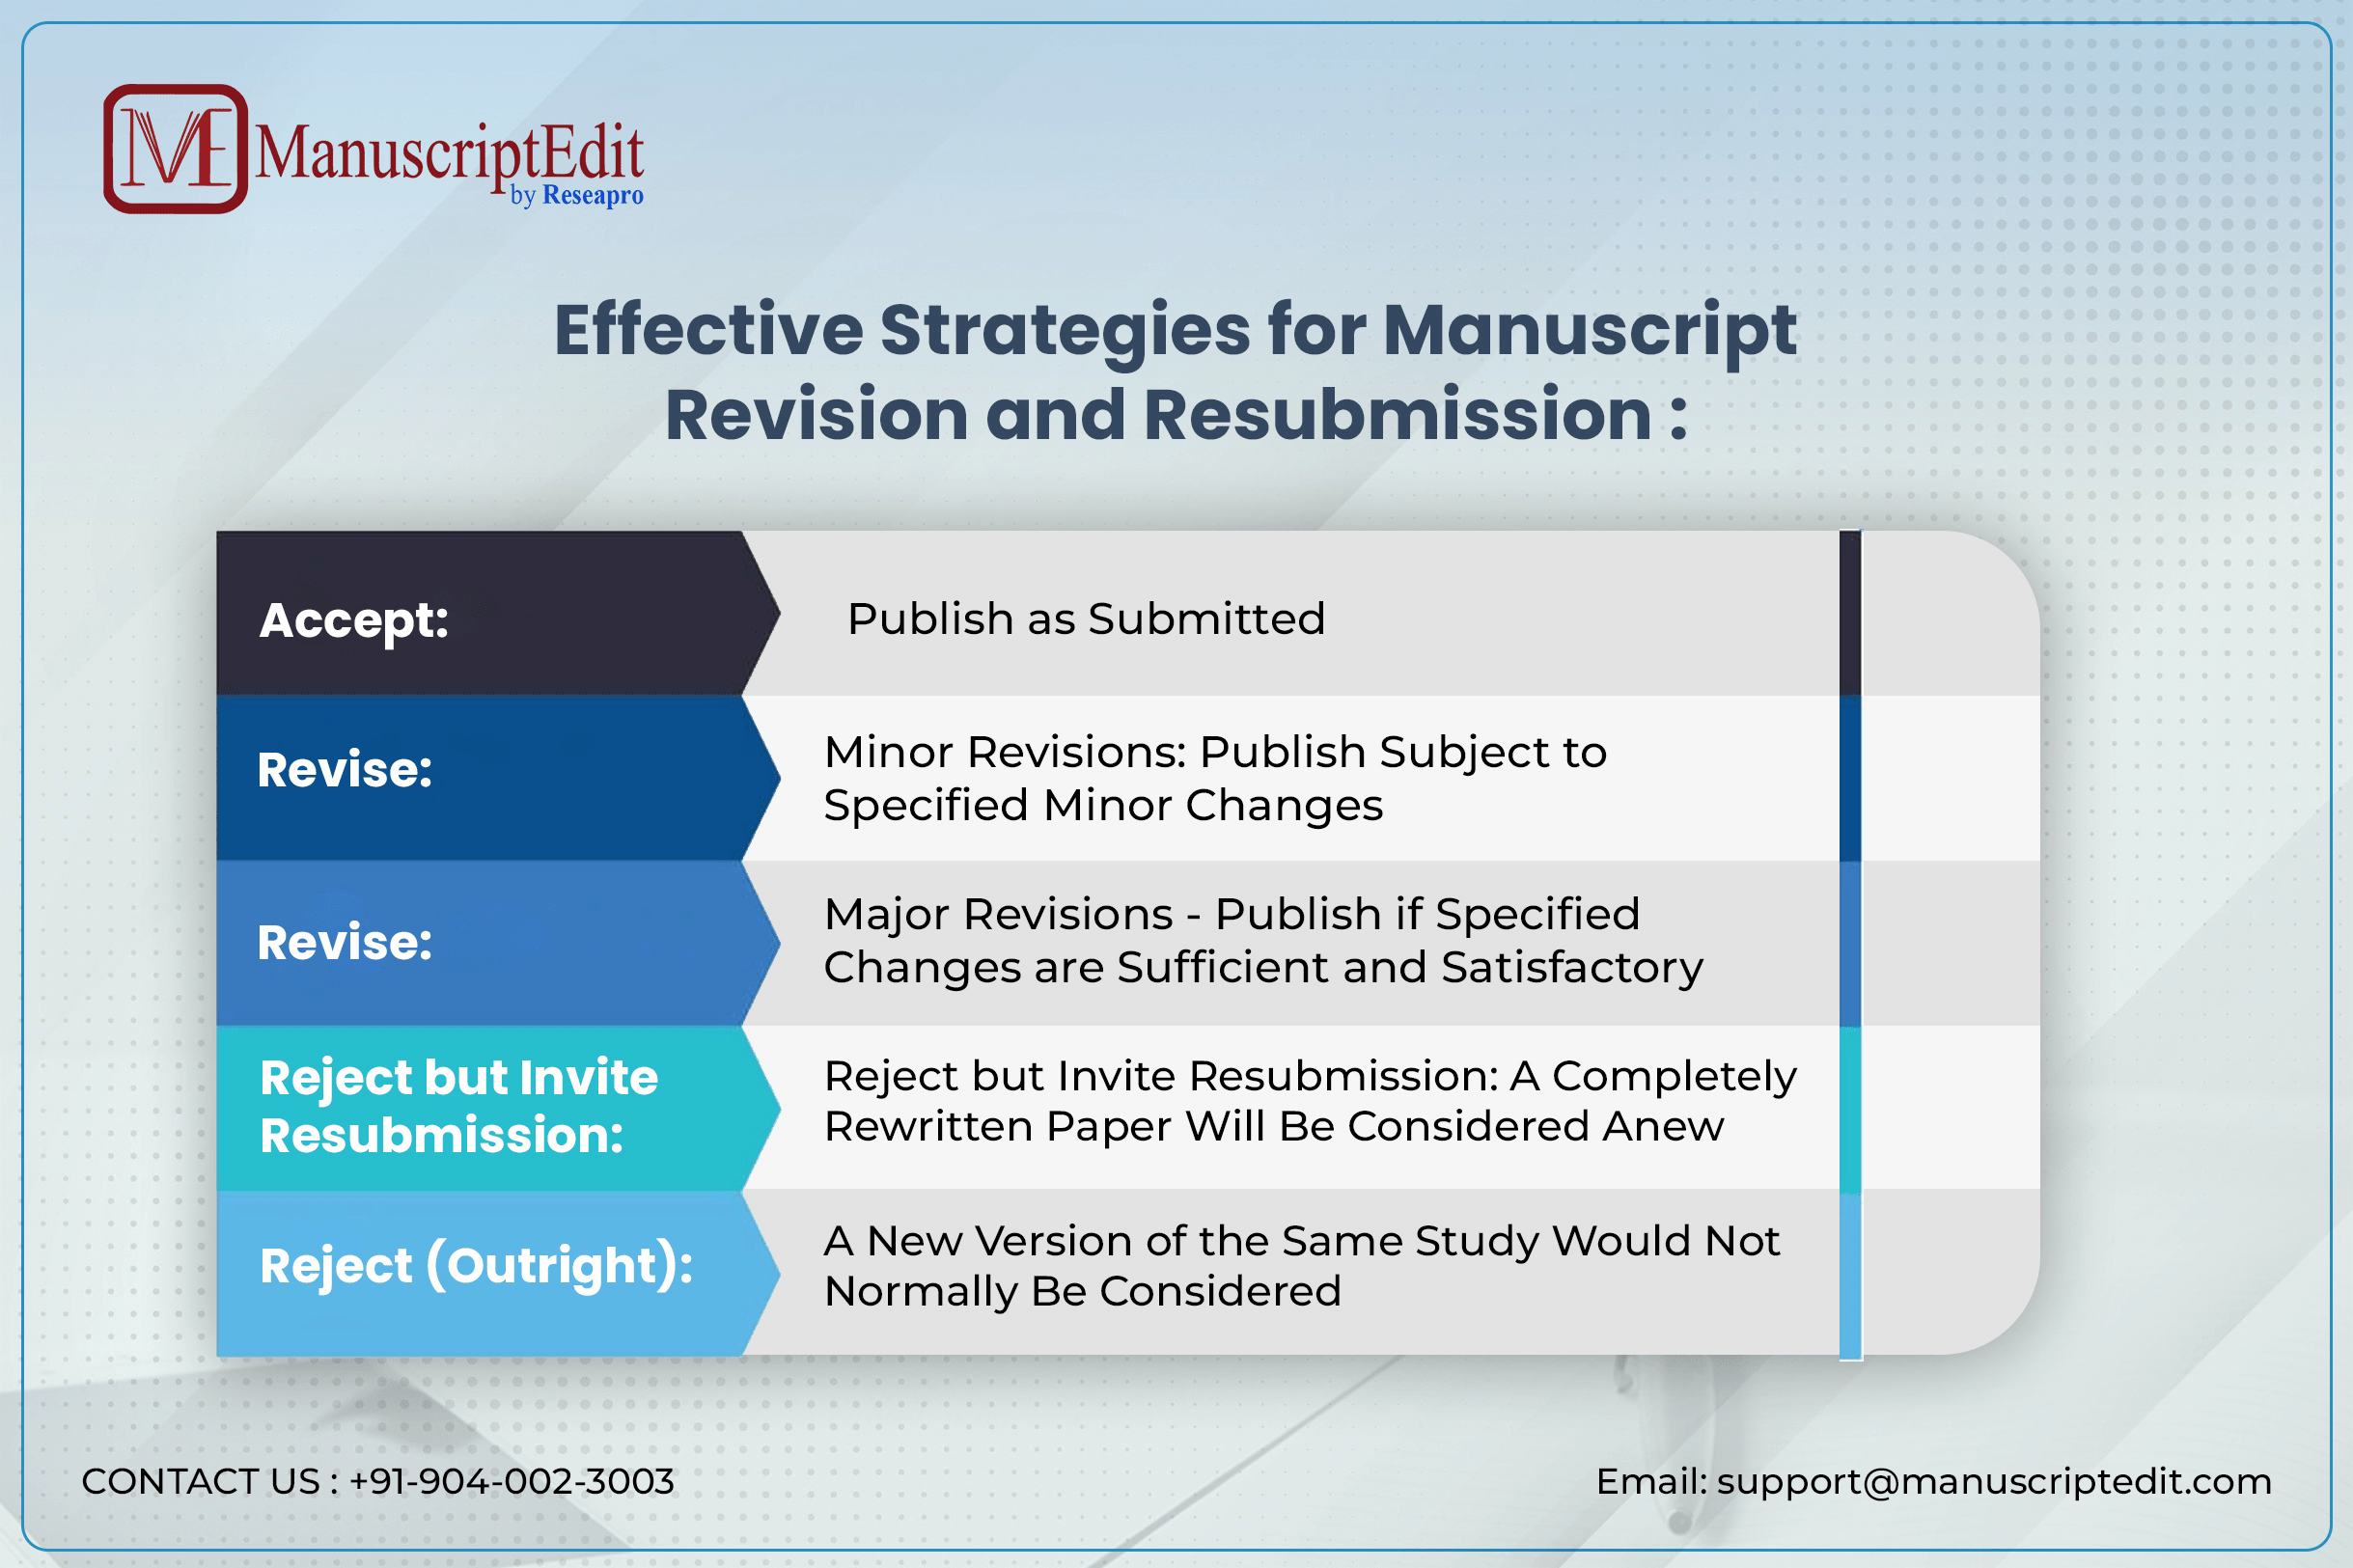 Effective Strategies for Manuscript Revision and Resubmission